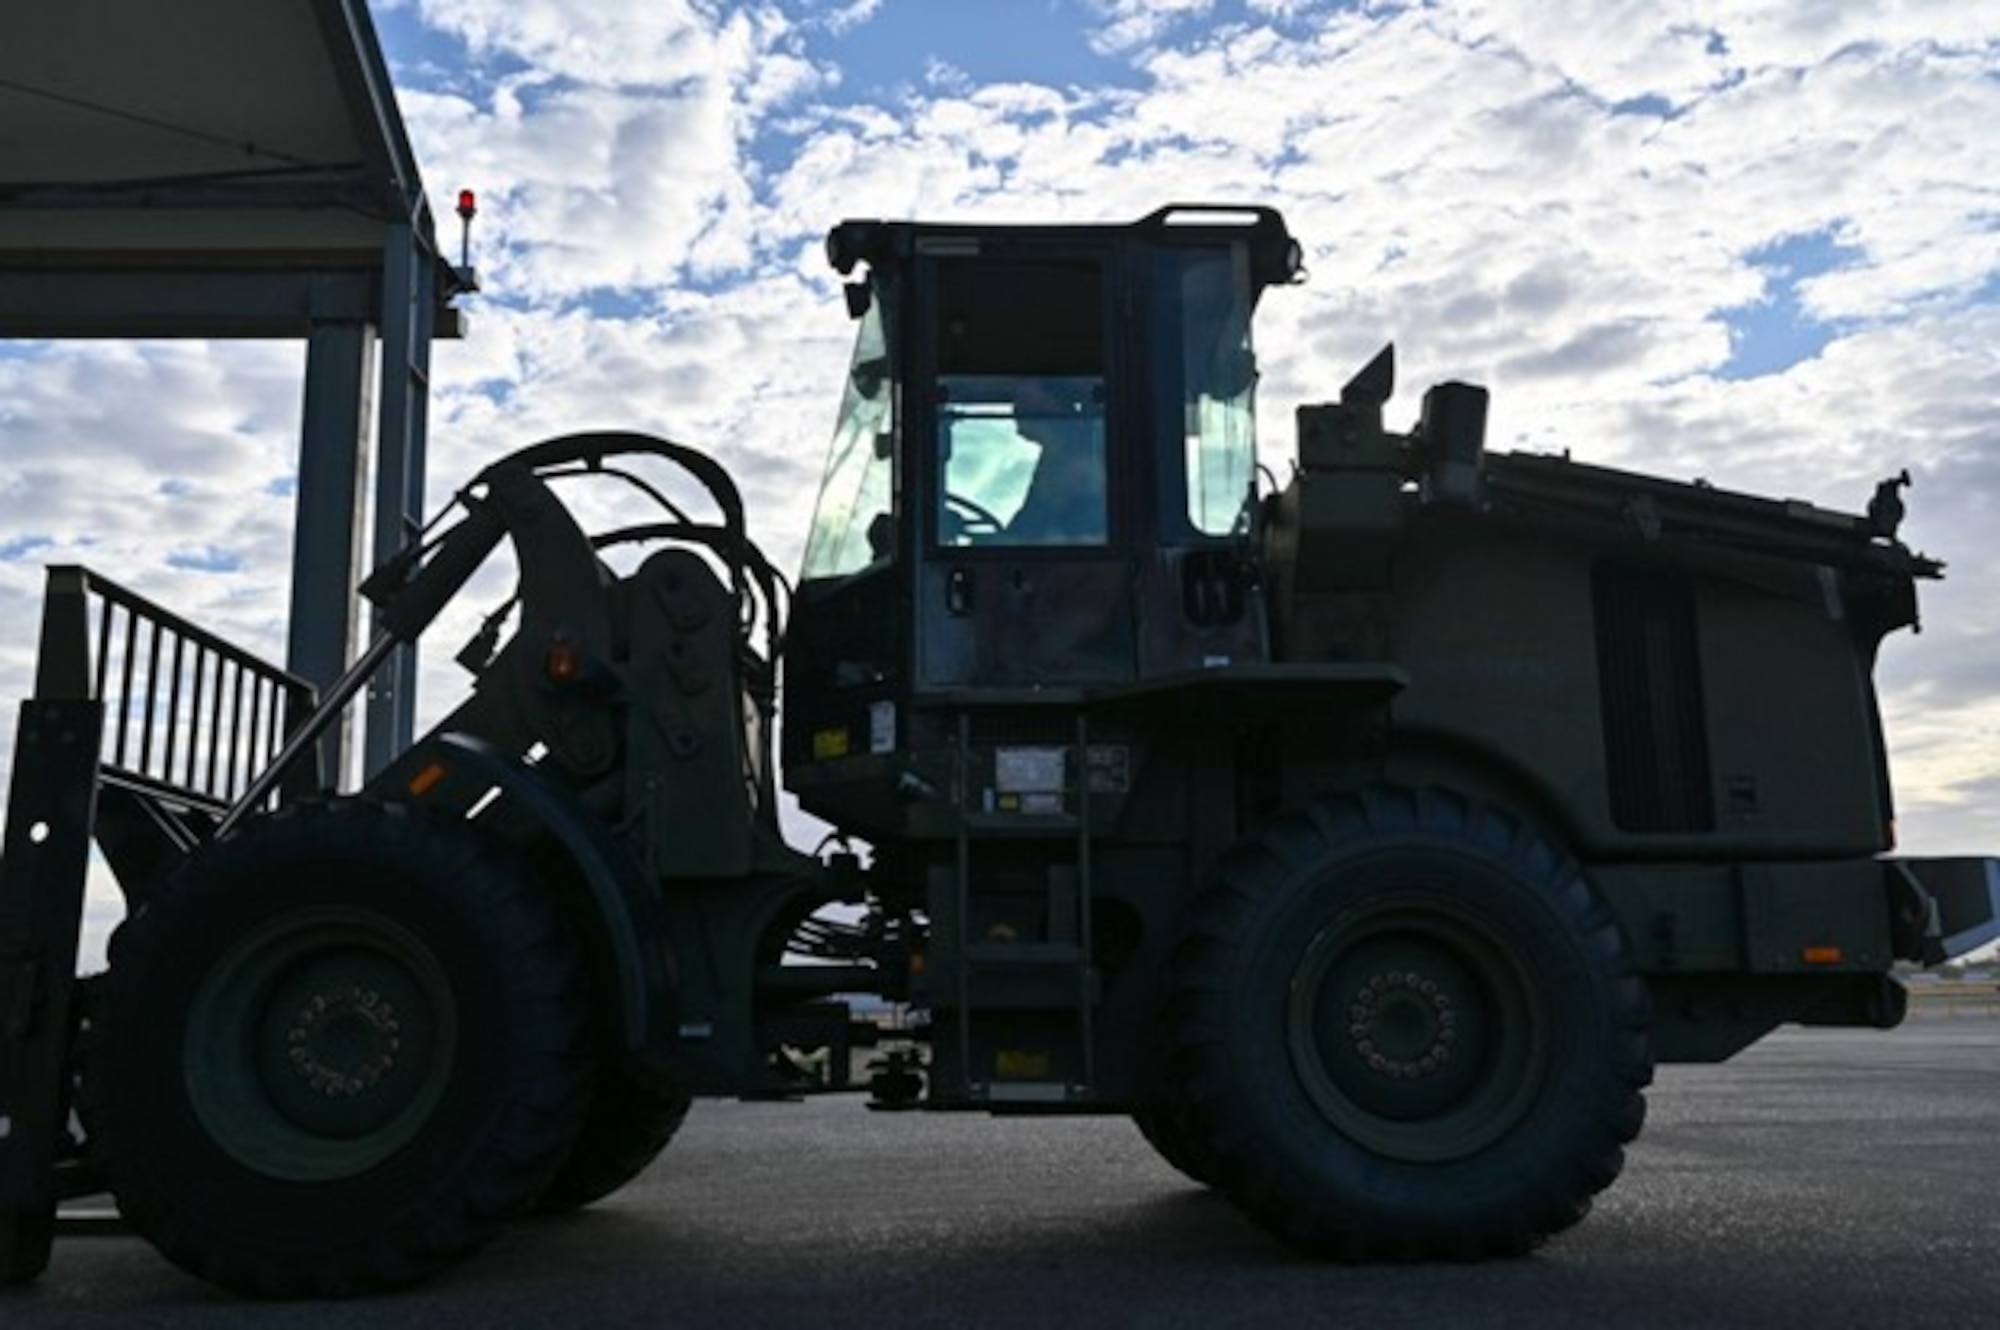 U.S. Air Force Staff Sgt. Derek Bright, 62d Logistics Readiness Squadron ground transportation, uses a forklift to move cargo during Exercise Rainier War 23A at Joint Base Lewis-McChord, Washington, Sept. 19, 2023. Rainier War is an exercise led by the 62d Airlift Wing designed to evaluate the ability to generate, employ and sustain in-garrison and forward deployed forces. These exercises are necessary in assessing and maintaining wartime operational tempos, ensuring command and control across multiple locations. During the exercise, Airmen will respond to scenarios that replicate today’s contingency operations and will address full-spectrum readiness against modern threats brought on by peer adversaries. (U.S. Air Force photo by Senior Airman Colleen Anthony)